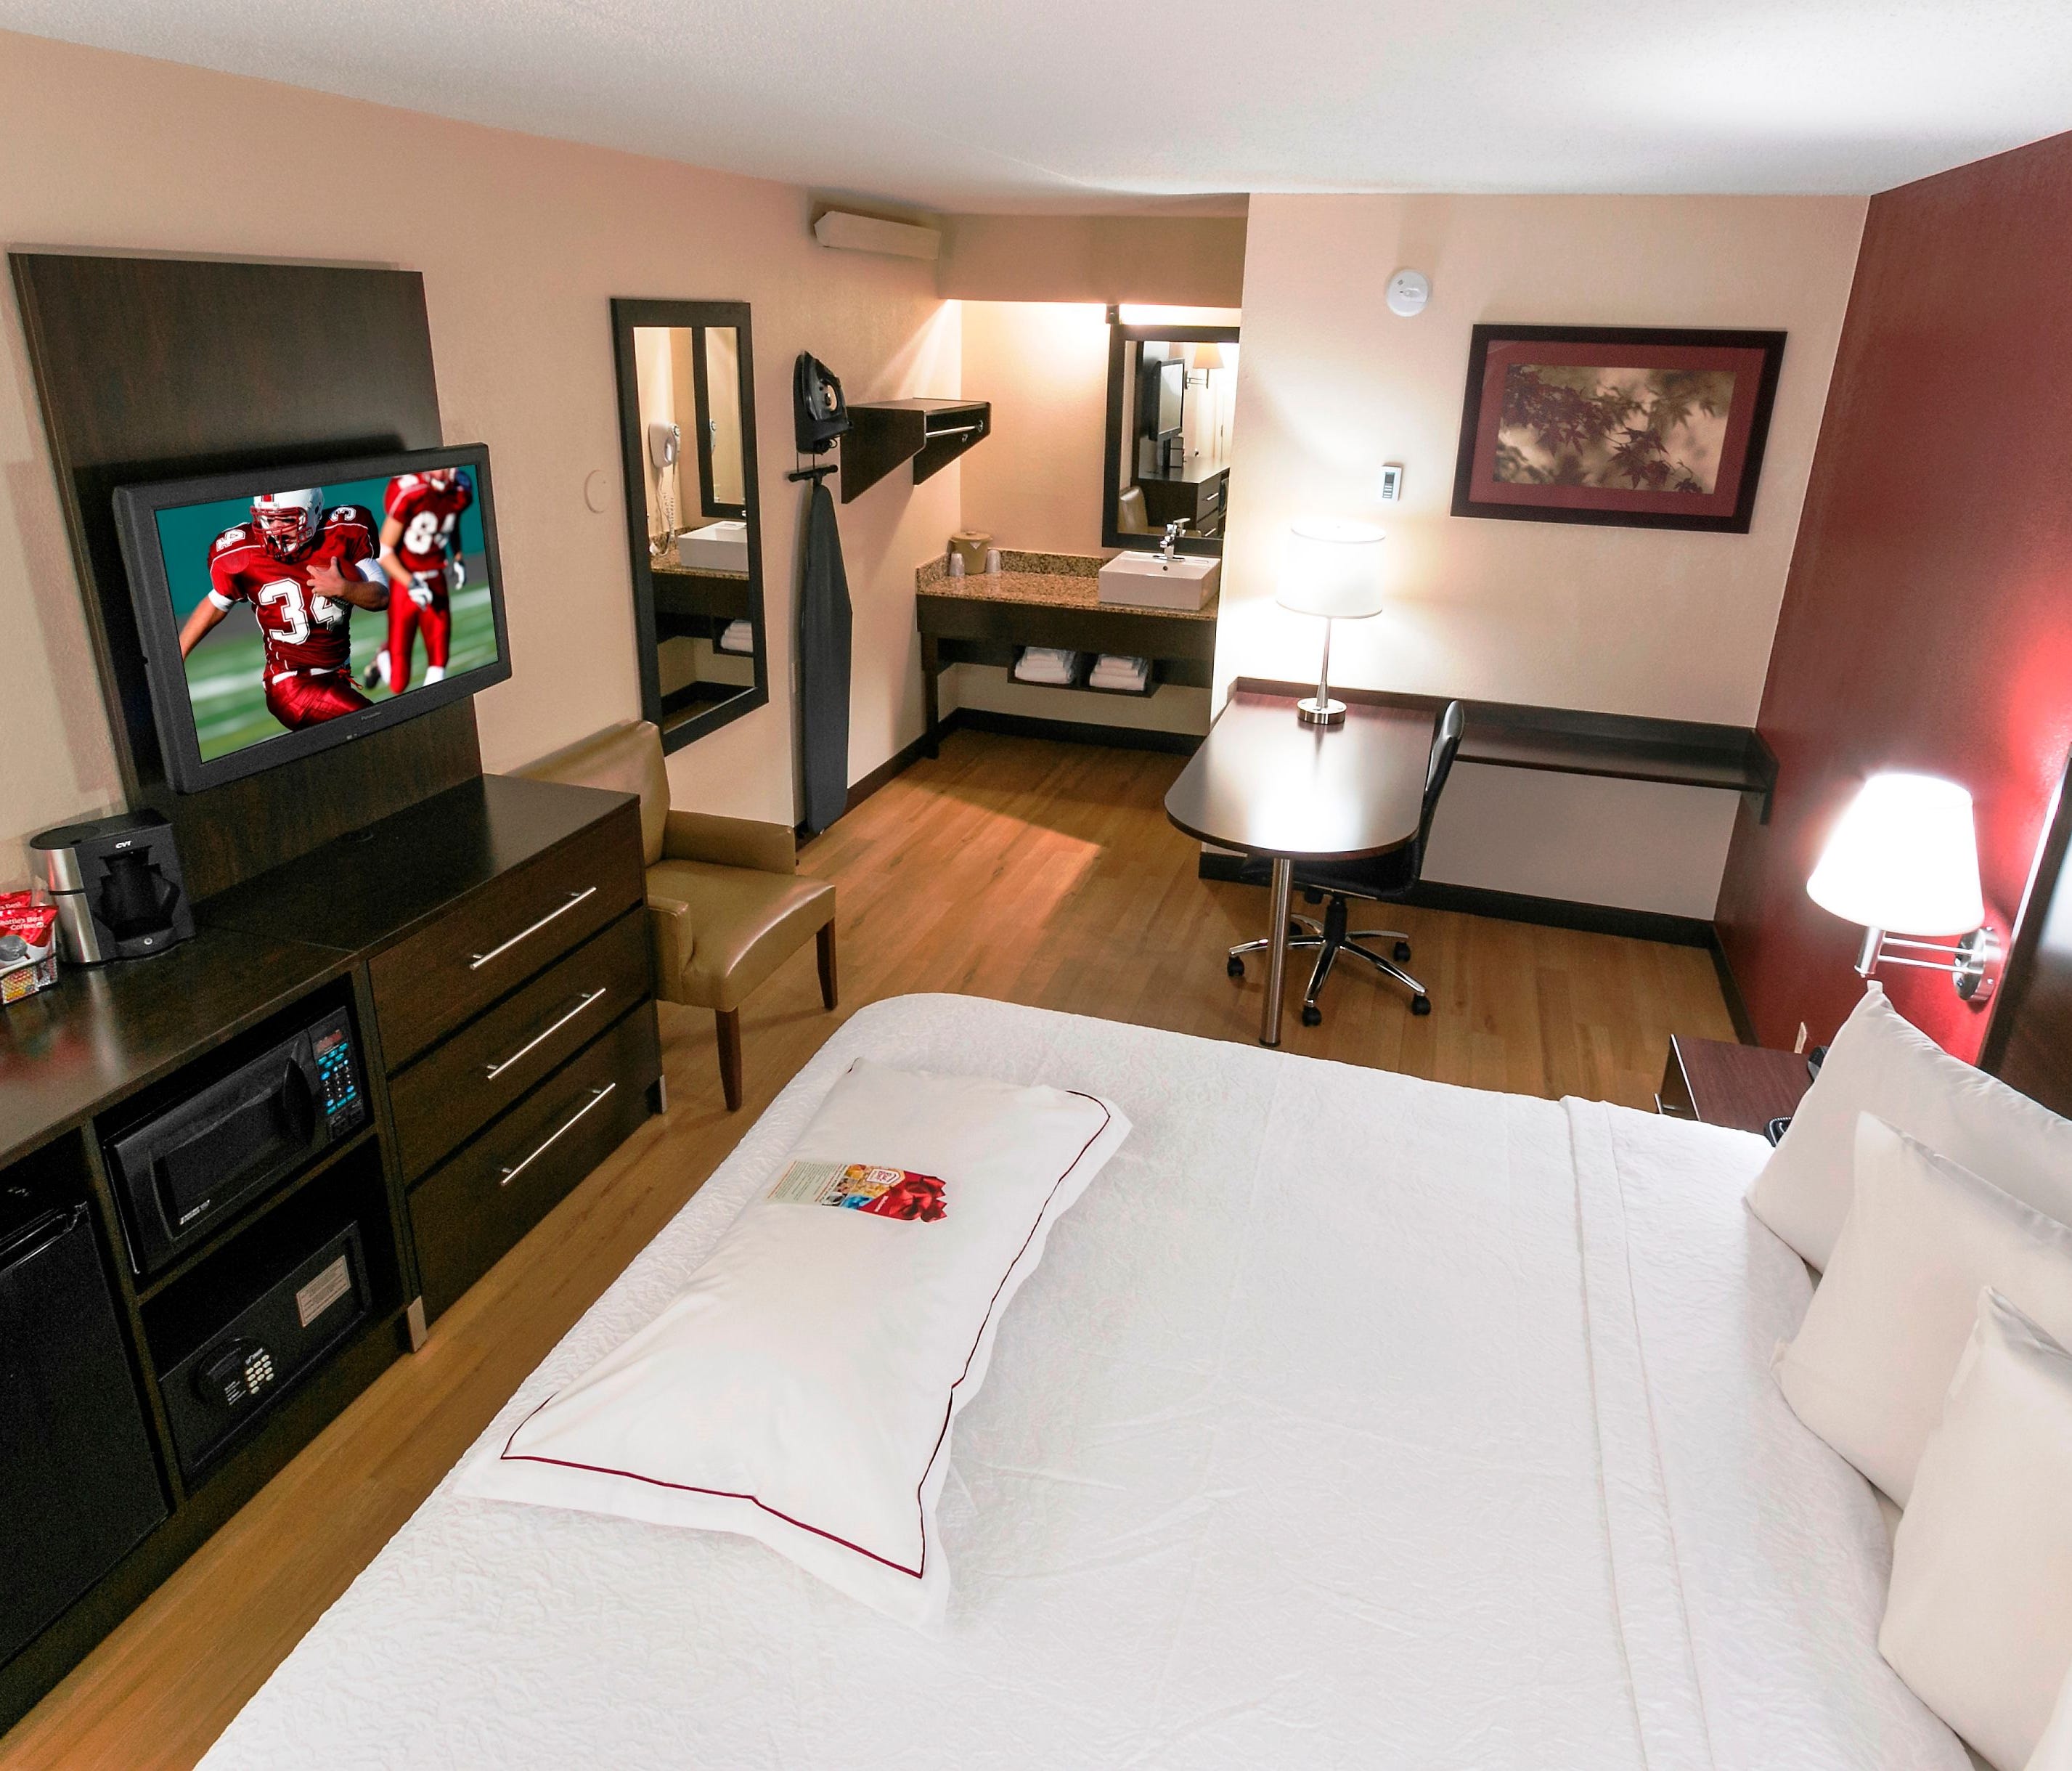 Red Roof Inn is one of several hotel brands taking steps to convince travelers to book directly through its channels.